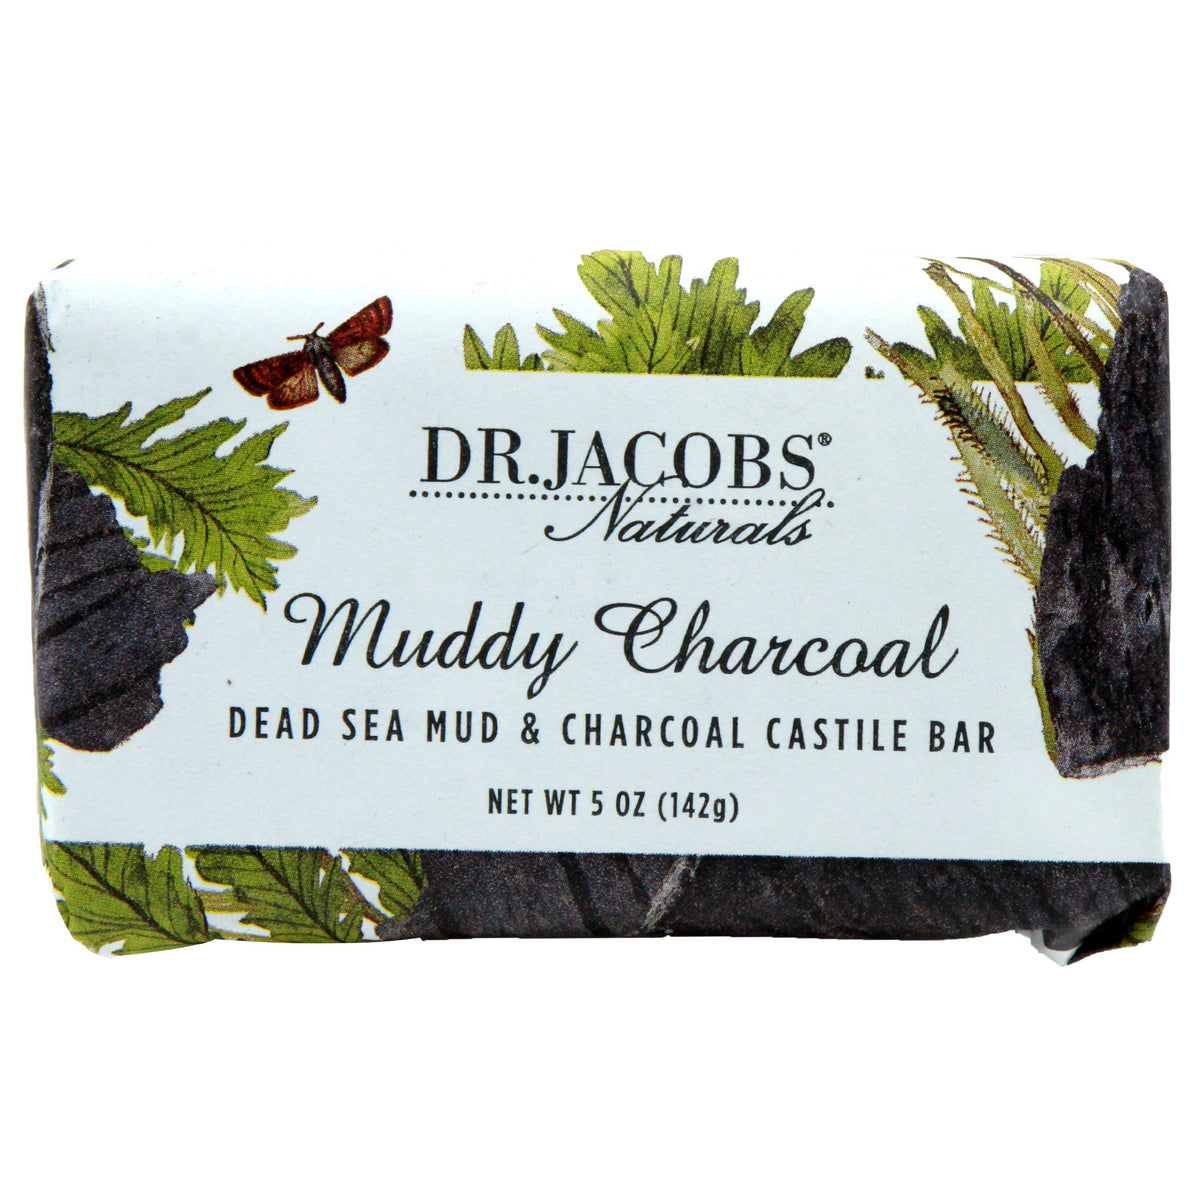 Muddy Charcoal by Dr. Jacobs Naturals